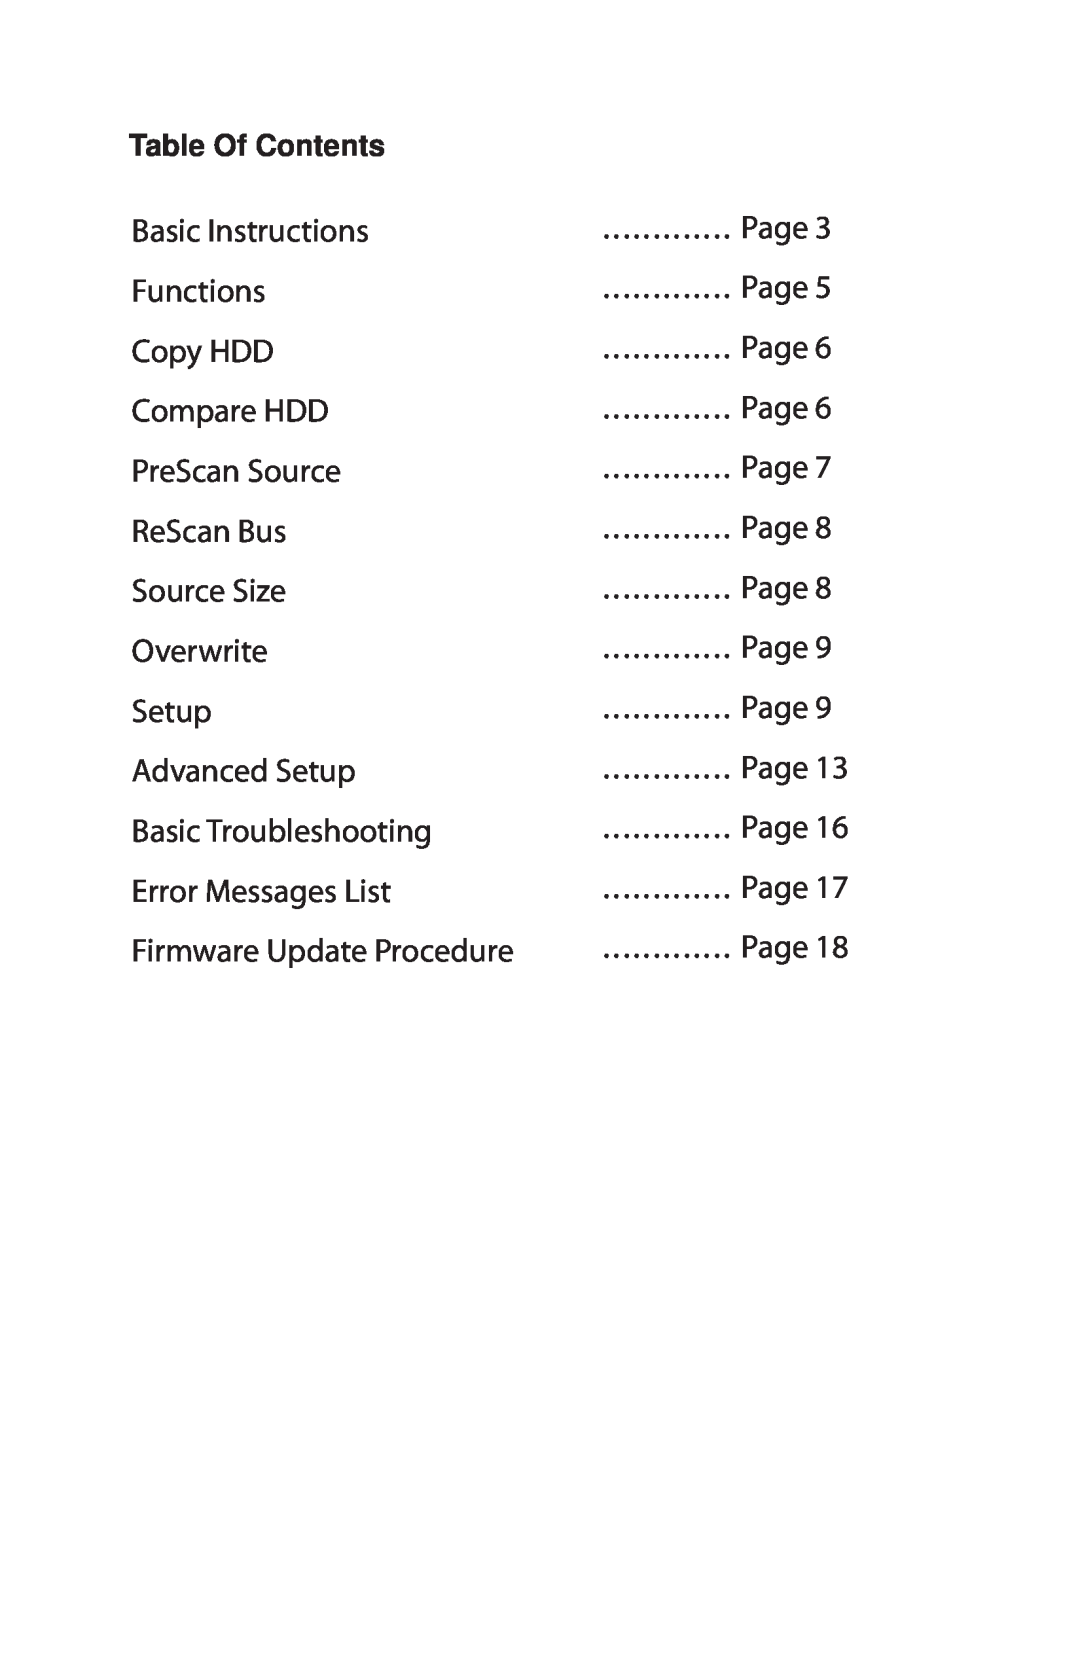 Addonics Technologies HDUS11325DX Basic Instructions Functions Copy HDD Compare HDD PreScan Source, Table Of Contents 